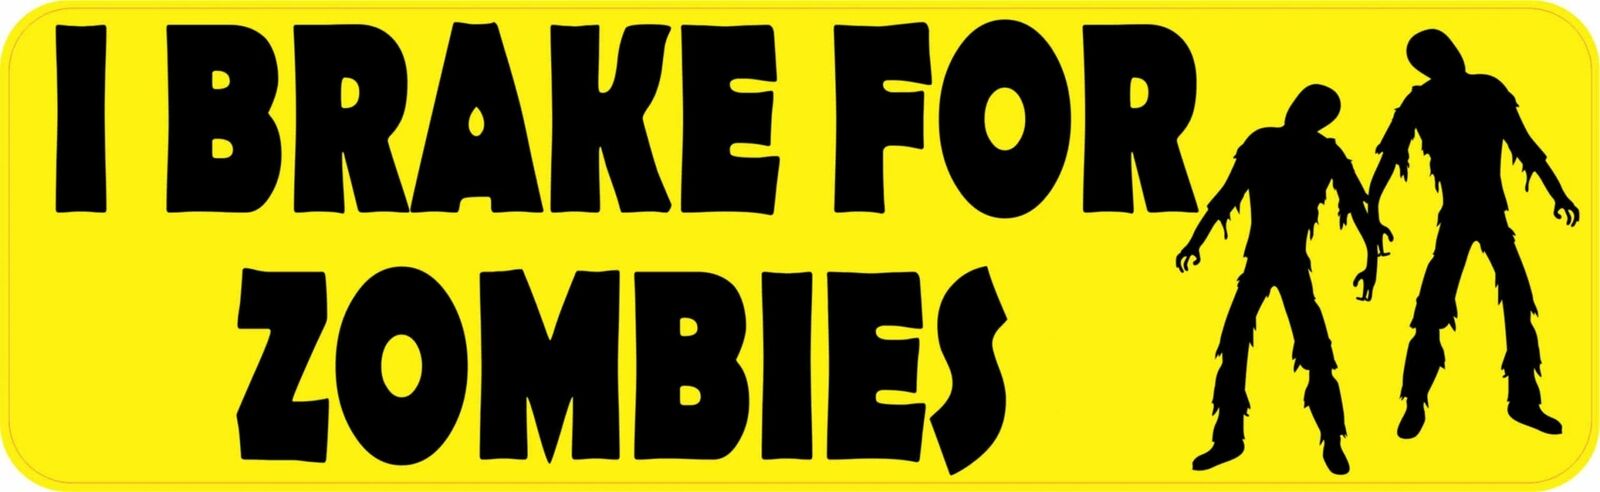 10x3 I Brake For Zombies Bumper Sticker Vinyl Decal Car Truck Stickers Decals